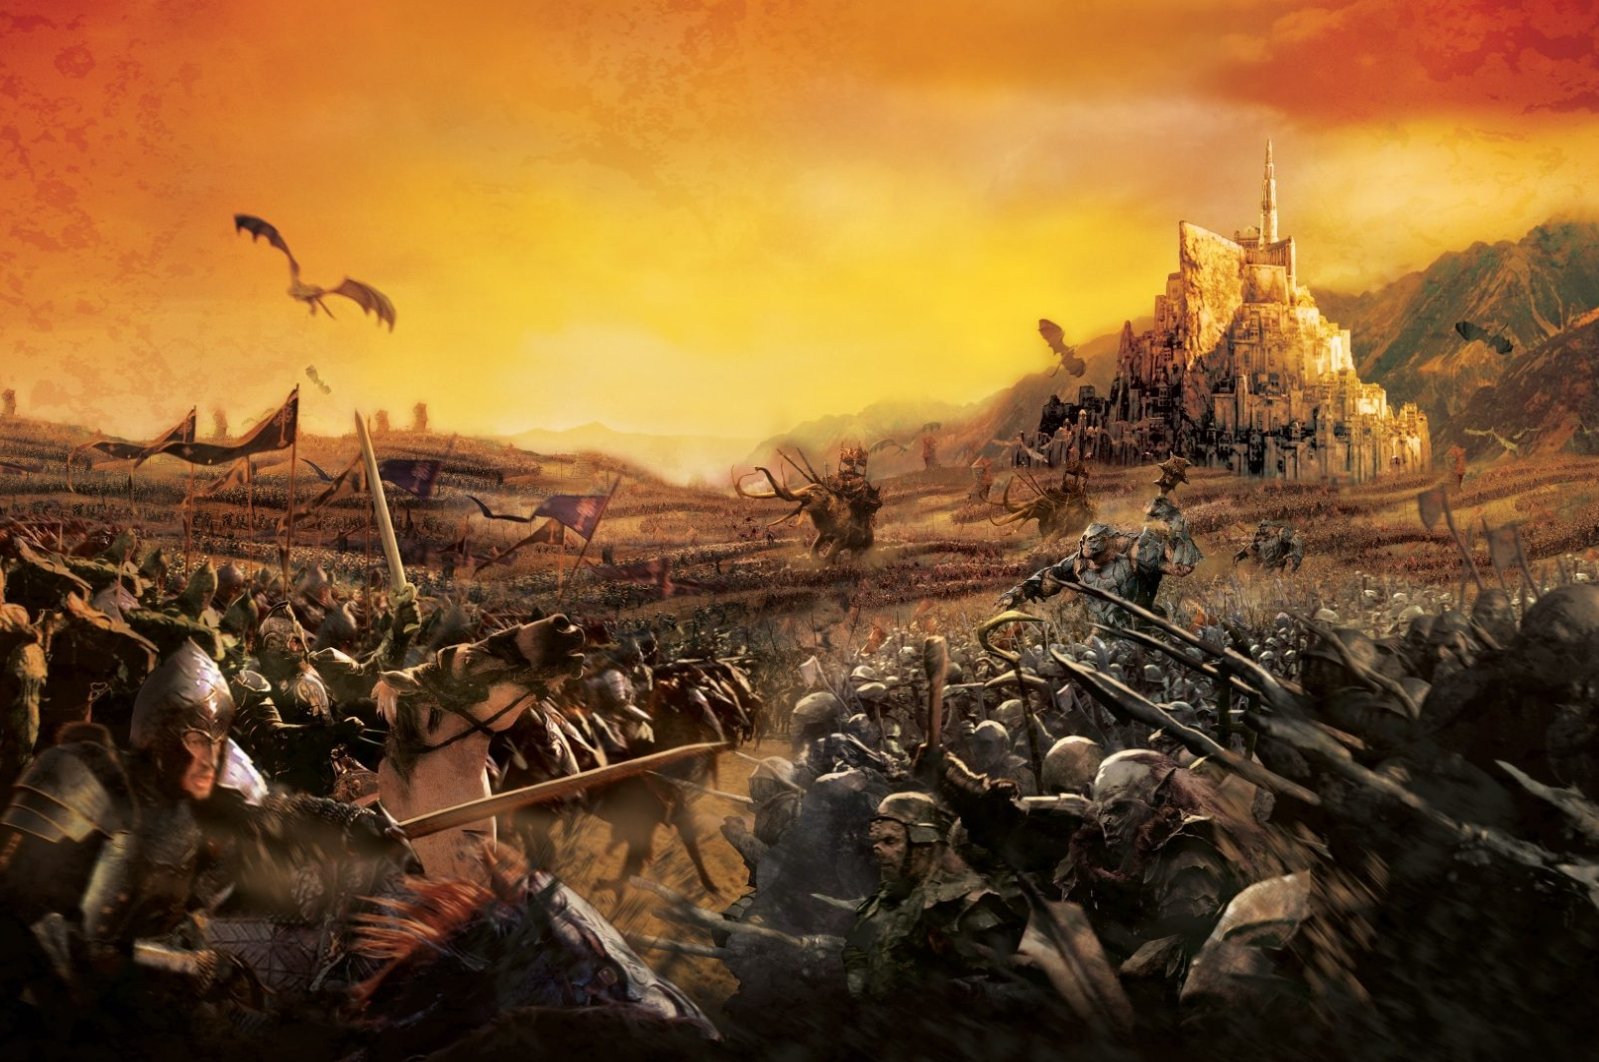 Concept art for the video game "The Lord of the Rings: The Battle for Middle-earth." (Photo courtesy of EA)